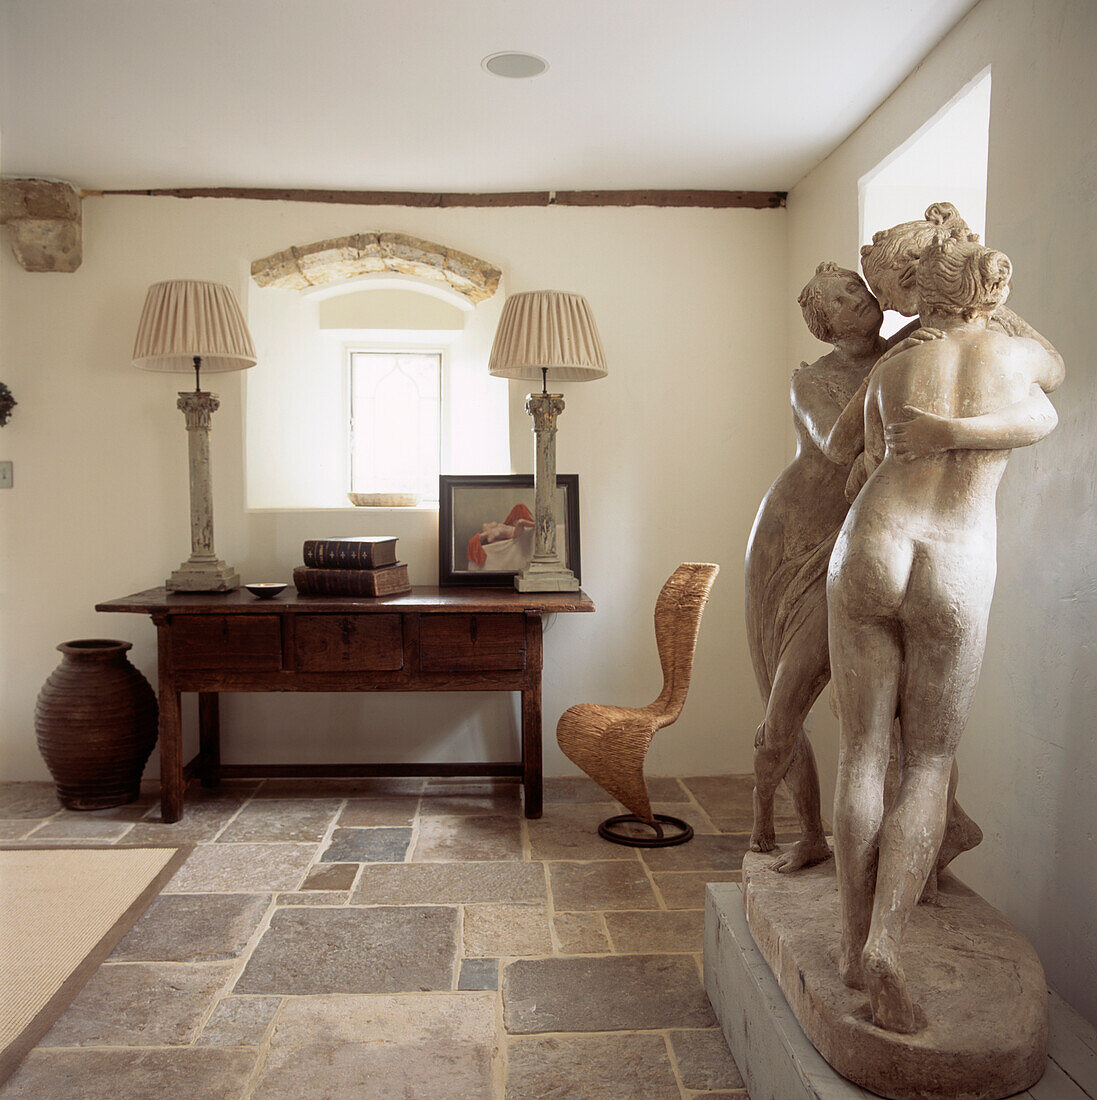 White entrance hall with stone floors and stone figurines